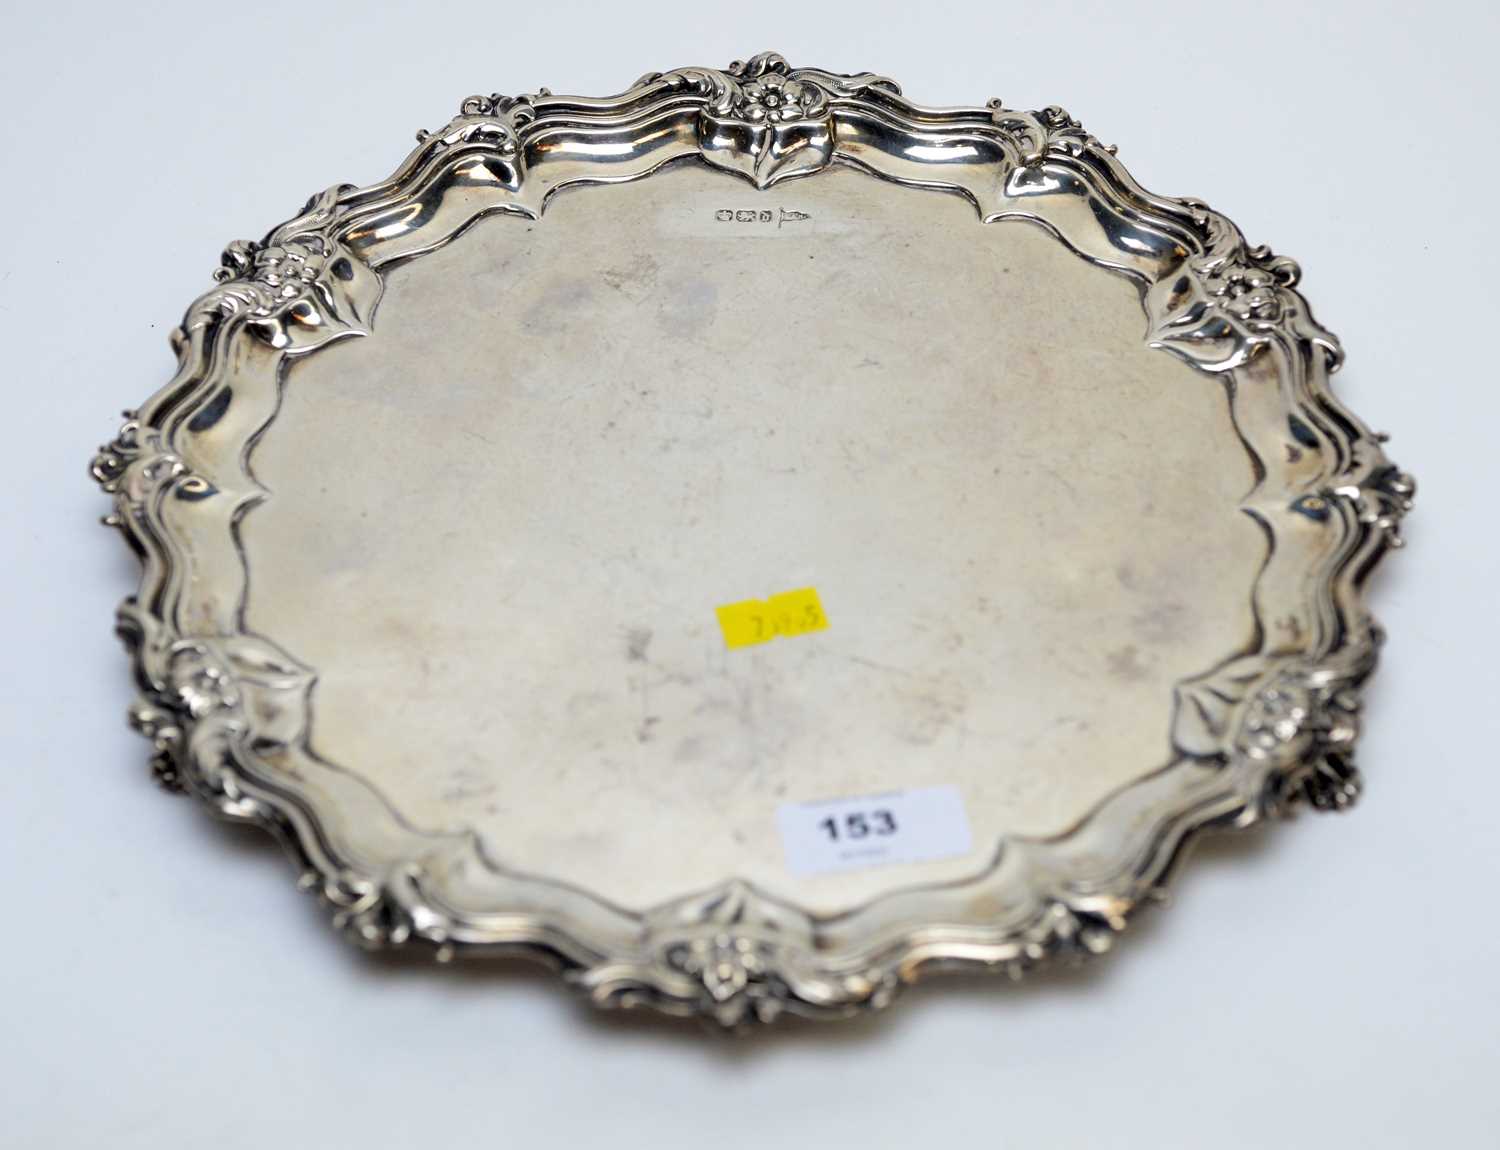 Lot 153 - A silver salver, by Walker & Hall